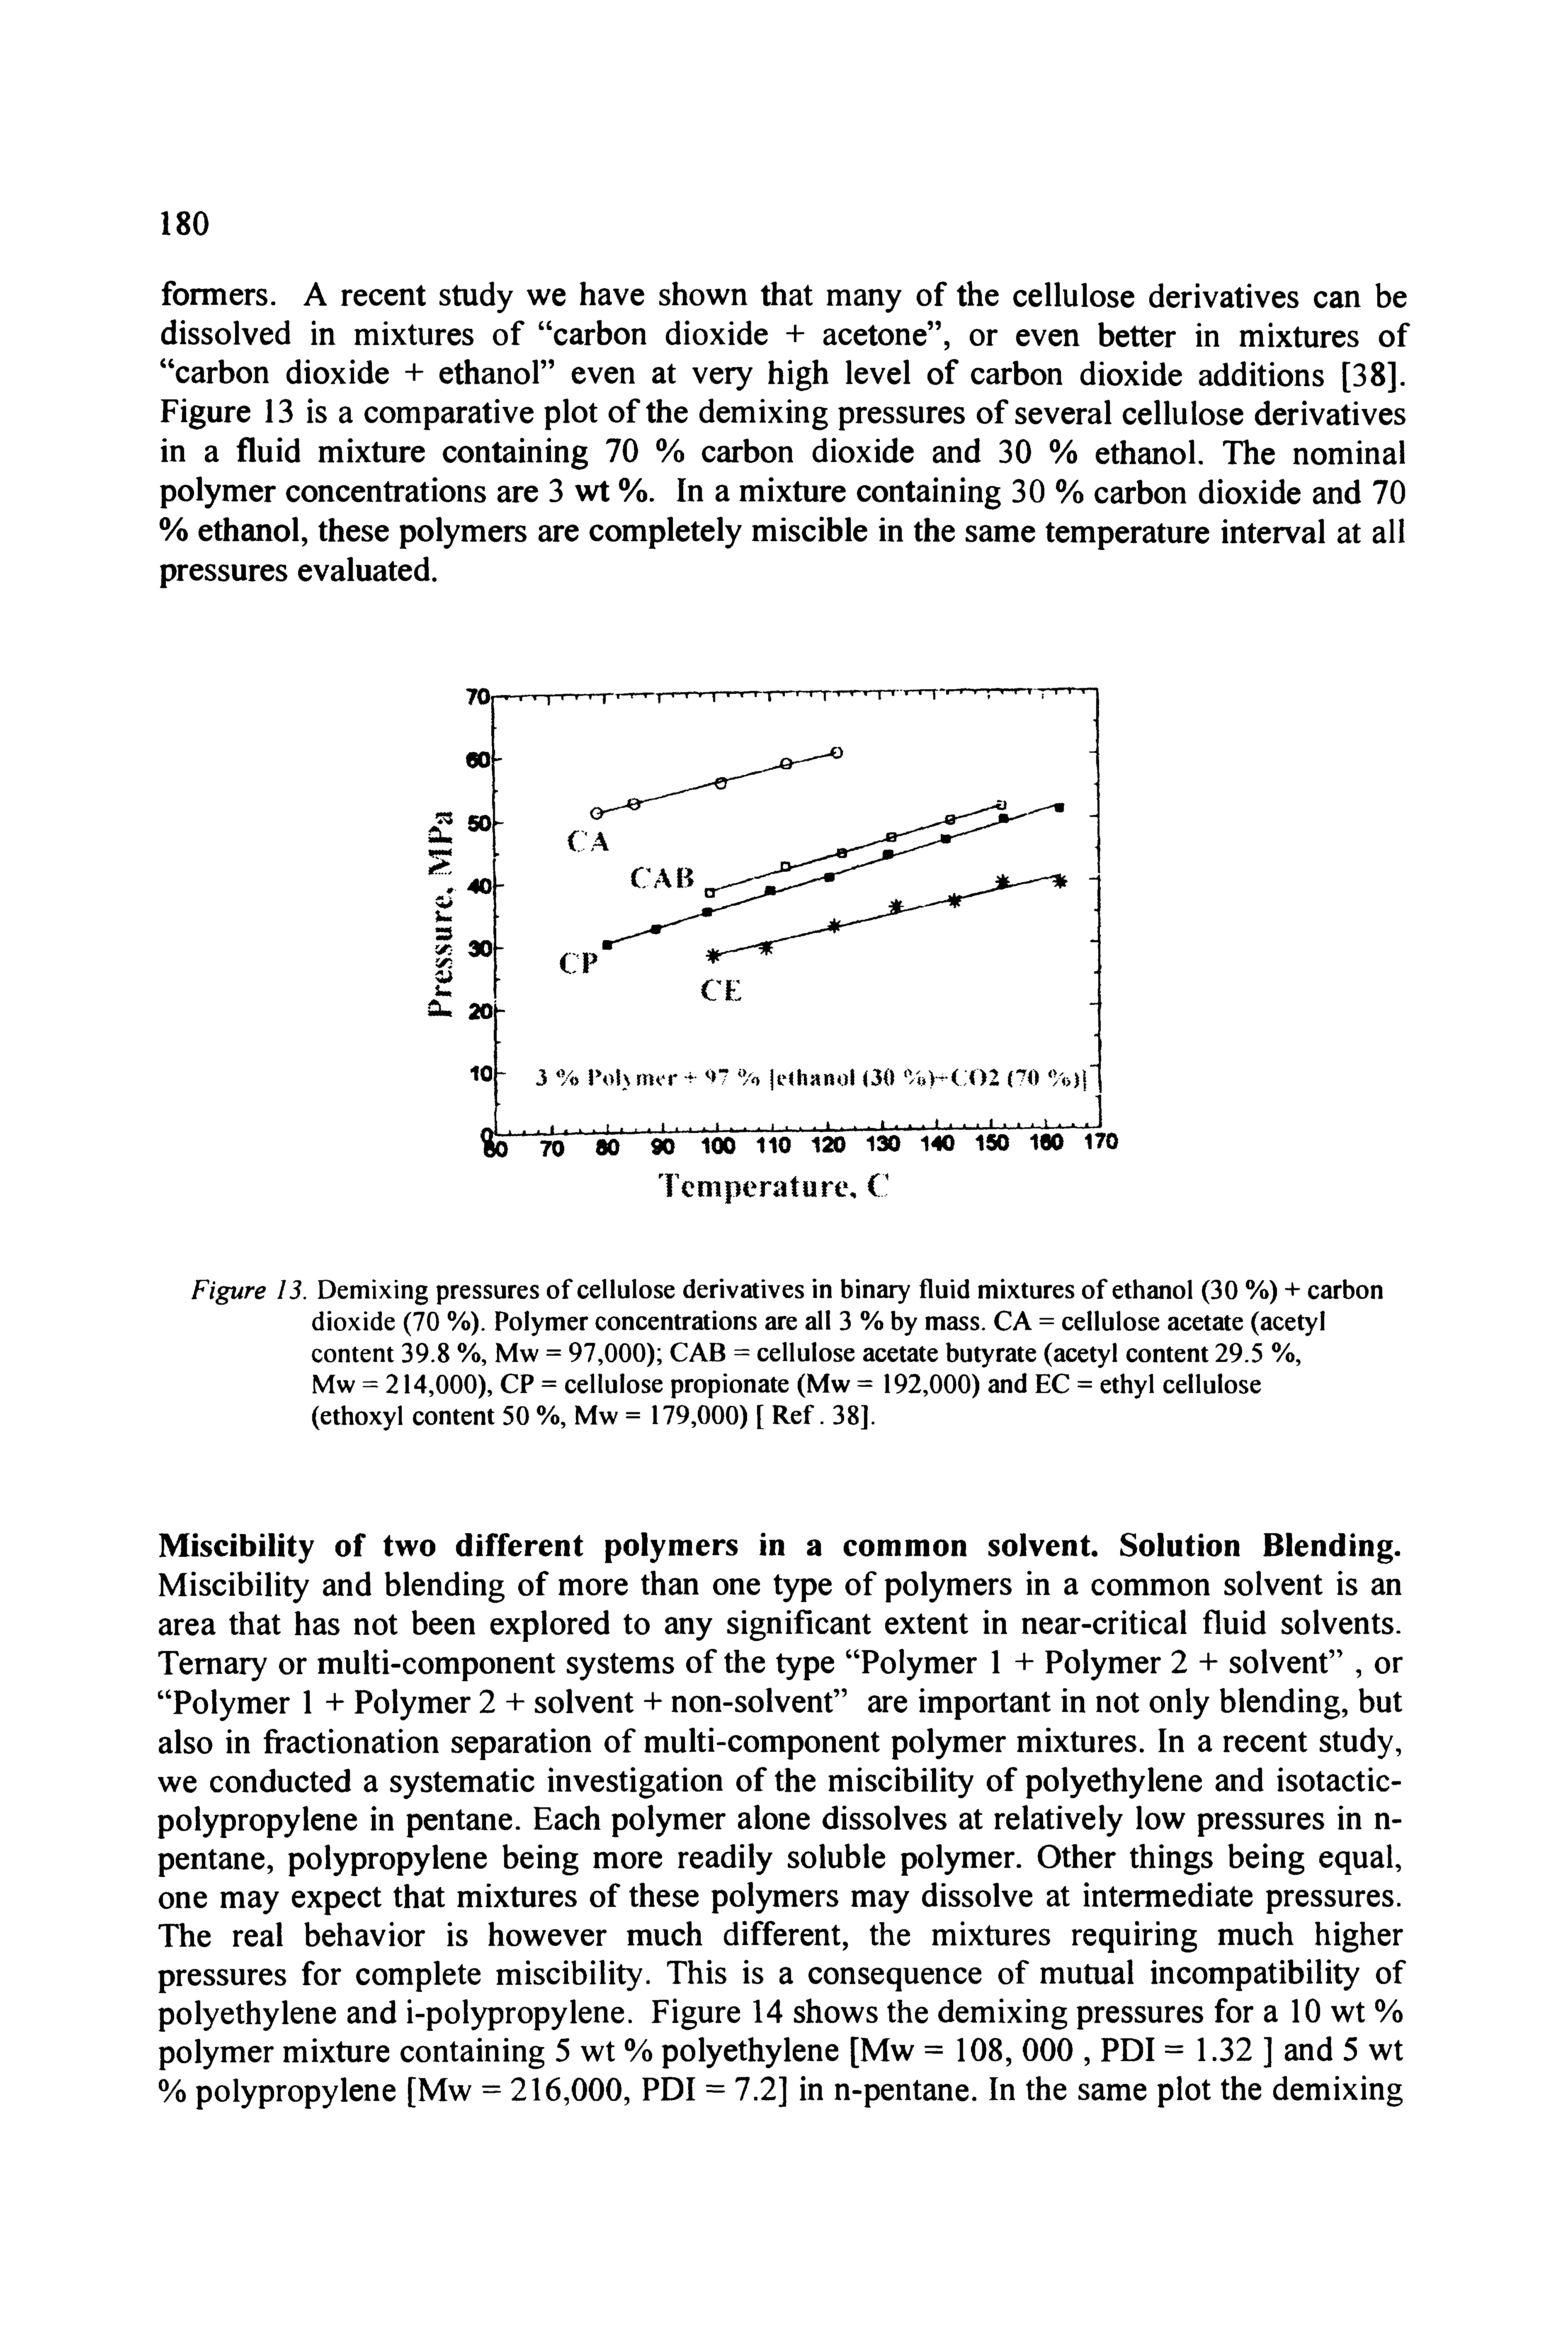 Figure 13. Demixing pressures of cellulose derivatives in binary fluid mixtures of ethanol (30 %) + carbon dioxide (70 %). Polymer concentrations are all 3 % by mass. CA = cellulose acetate (acetyl content 39.8 %, Mw = 97,000) CAB = cellulose acetate butyrate (acetyl content 29.5 %,...